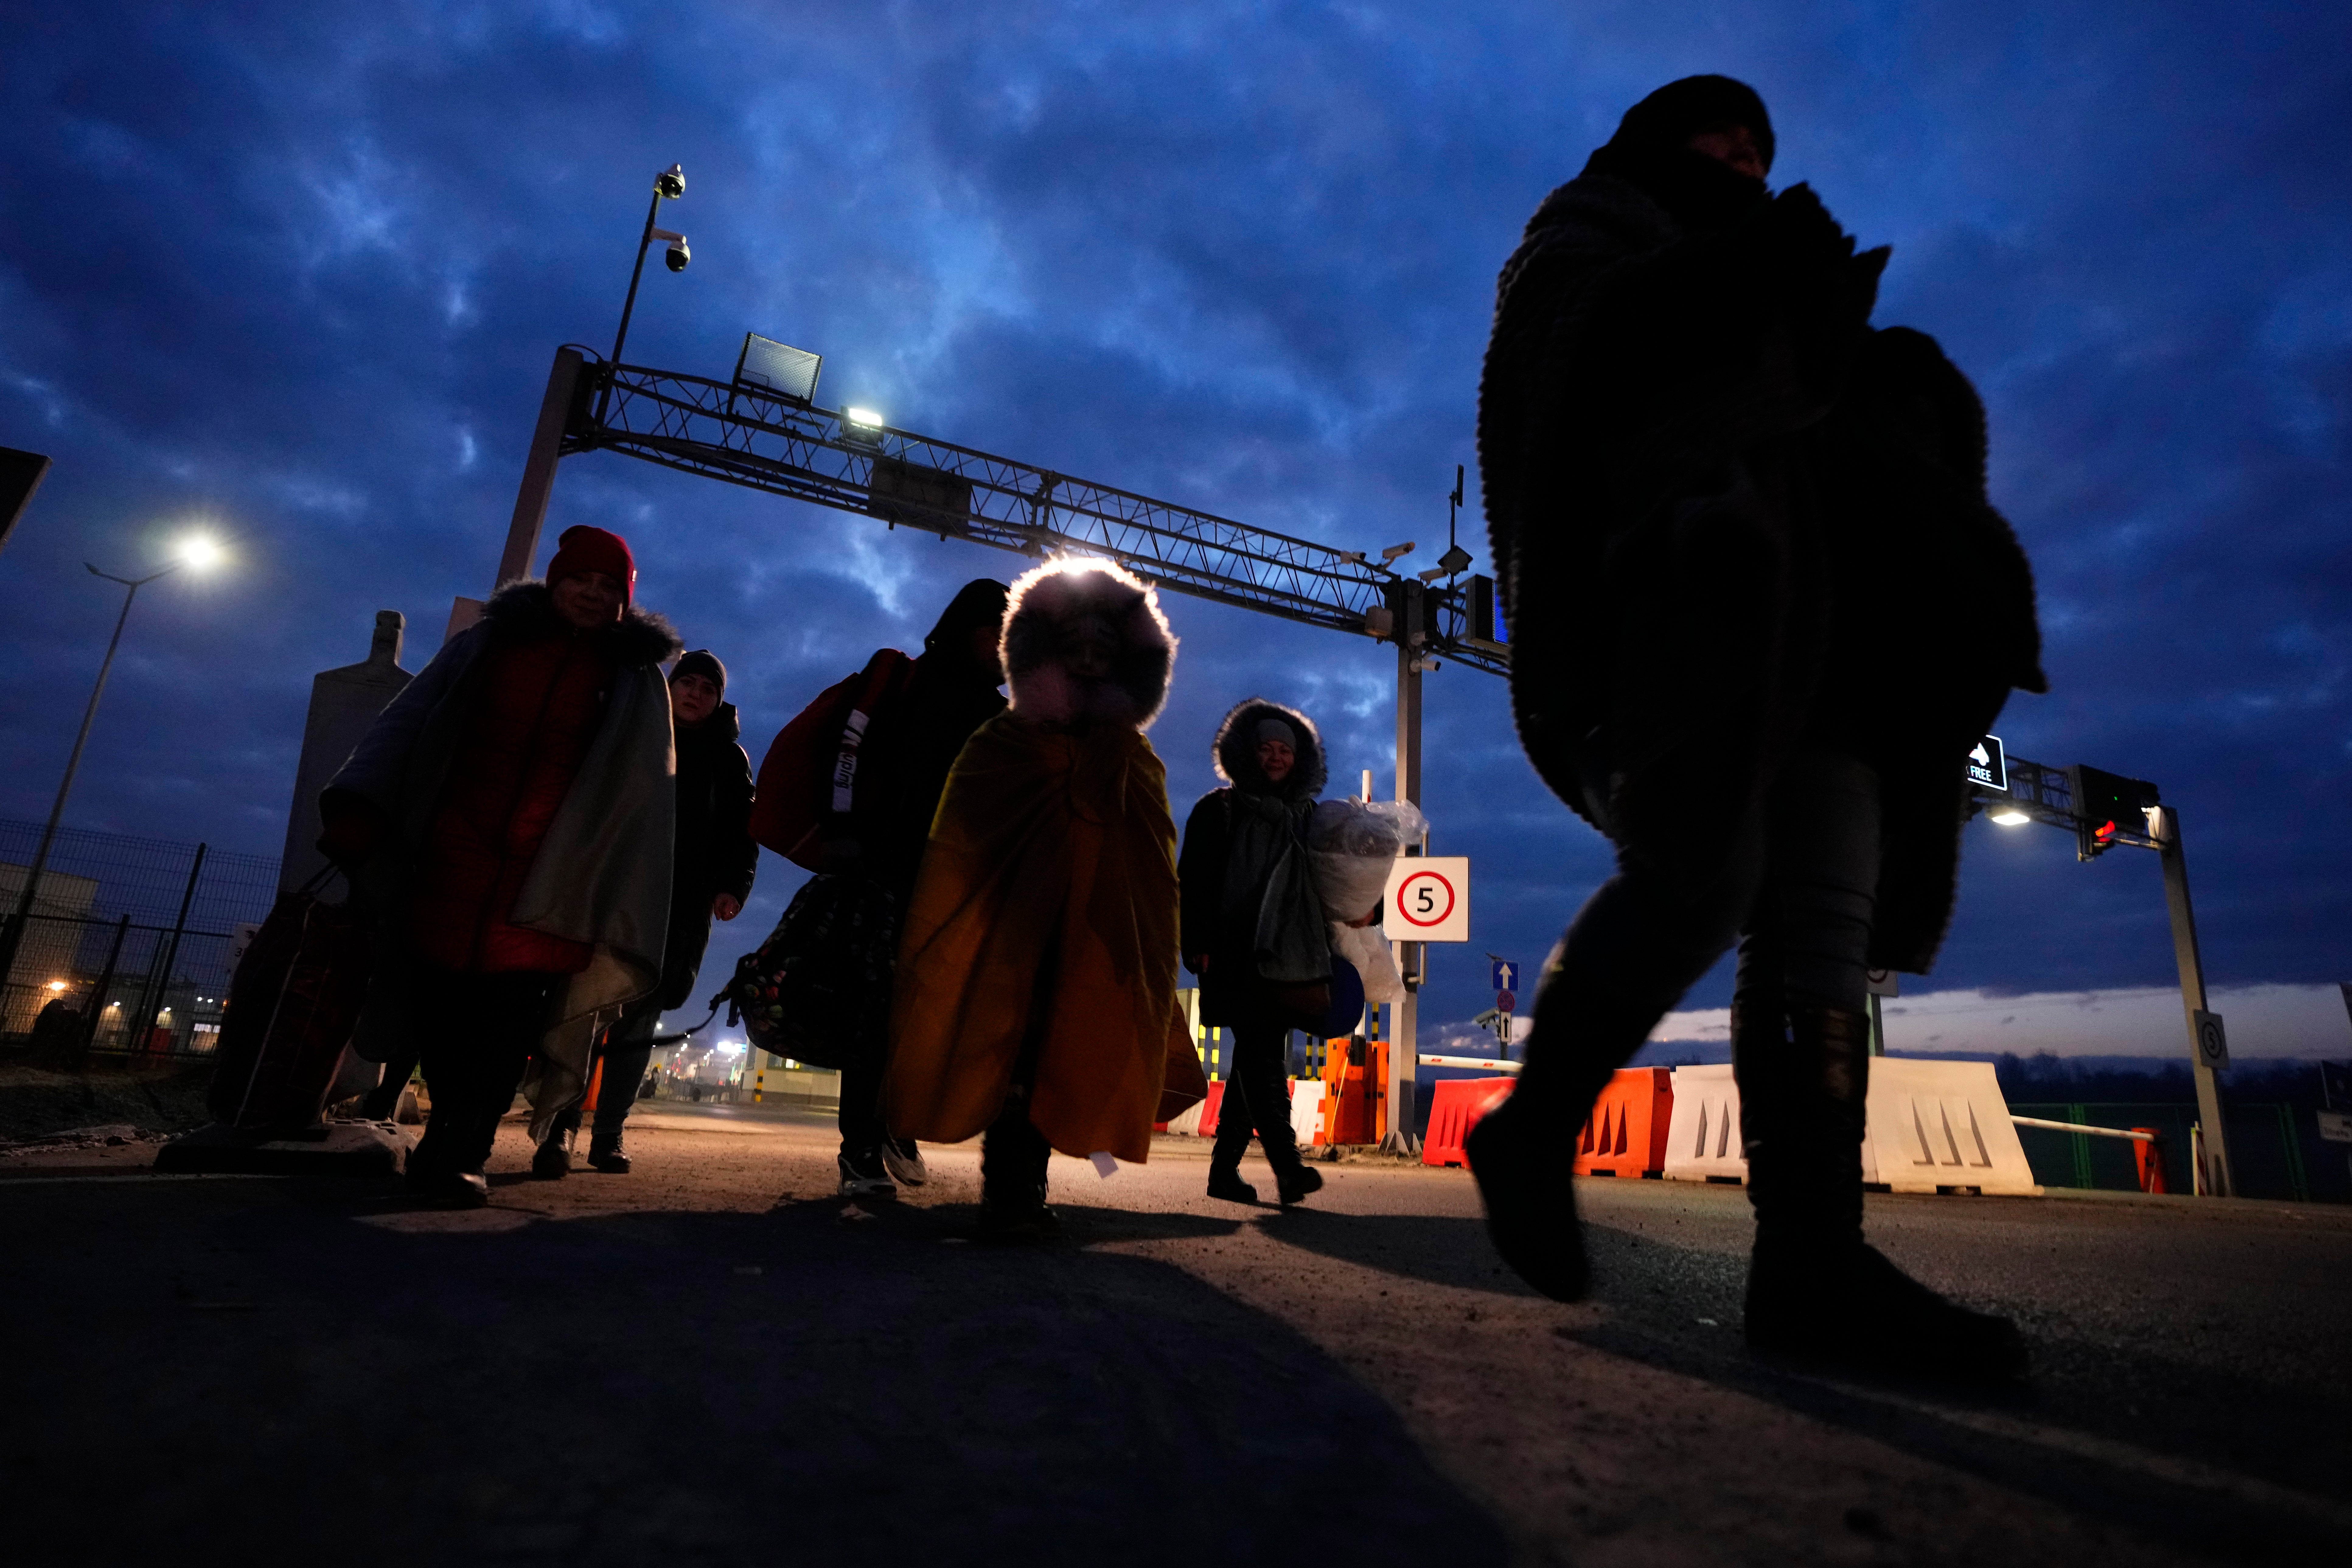 Nearly one million people applied for asylum in the EU last year